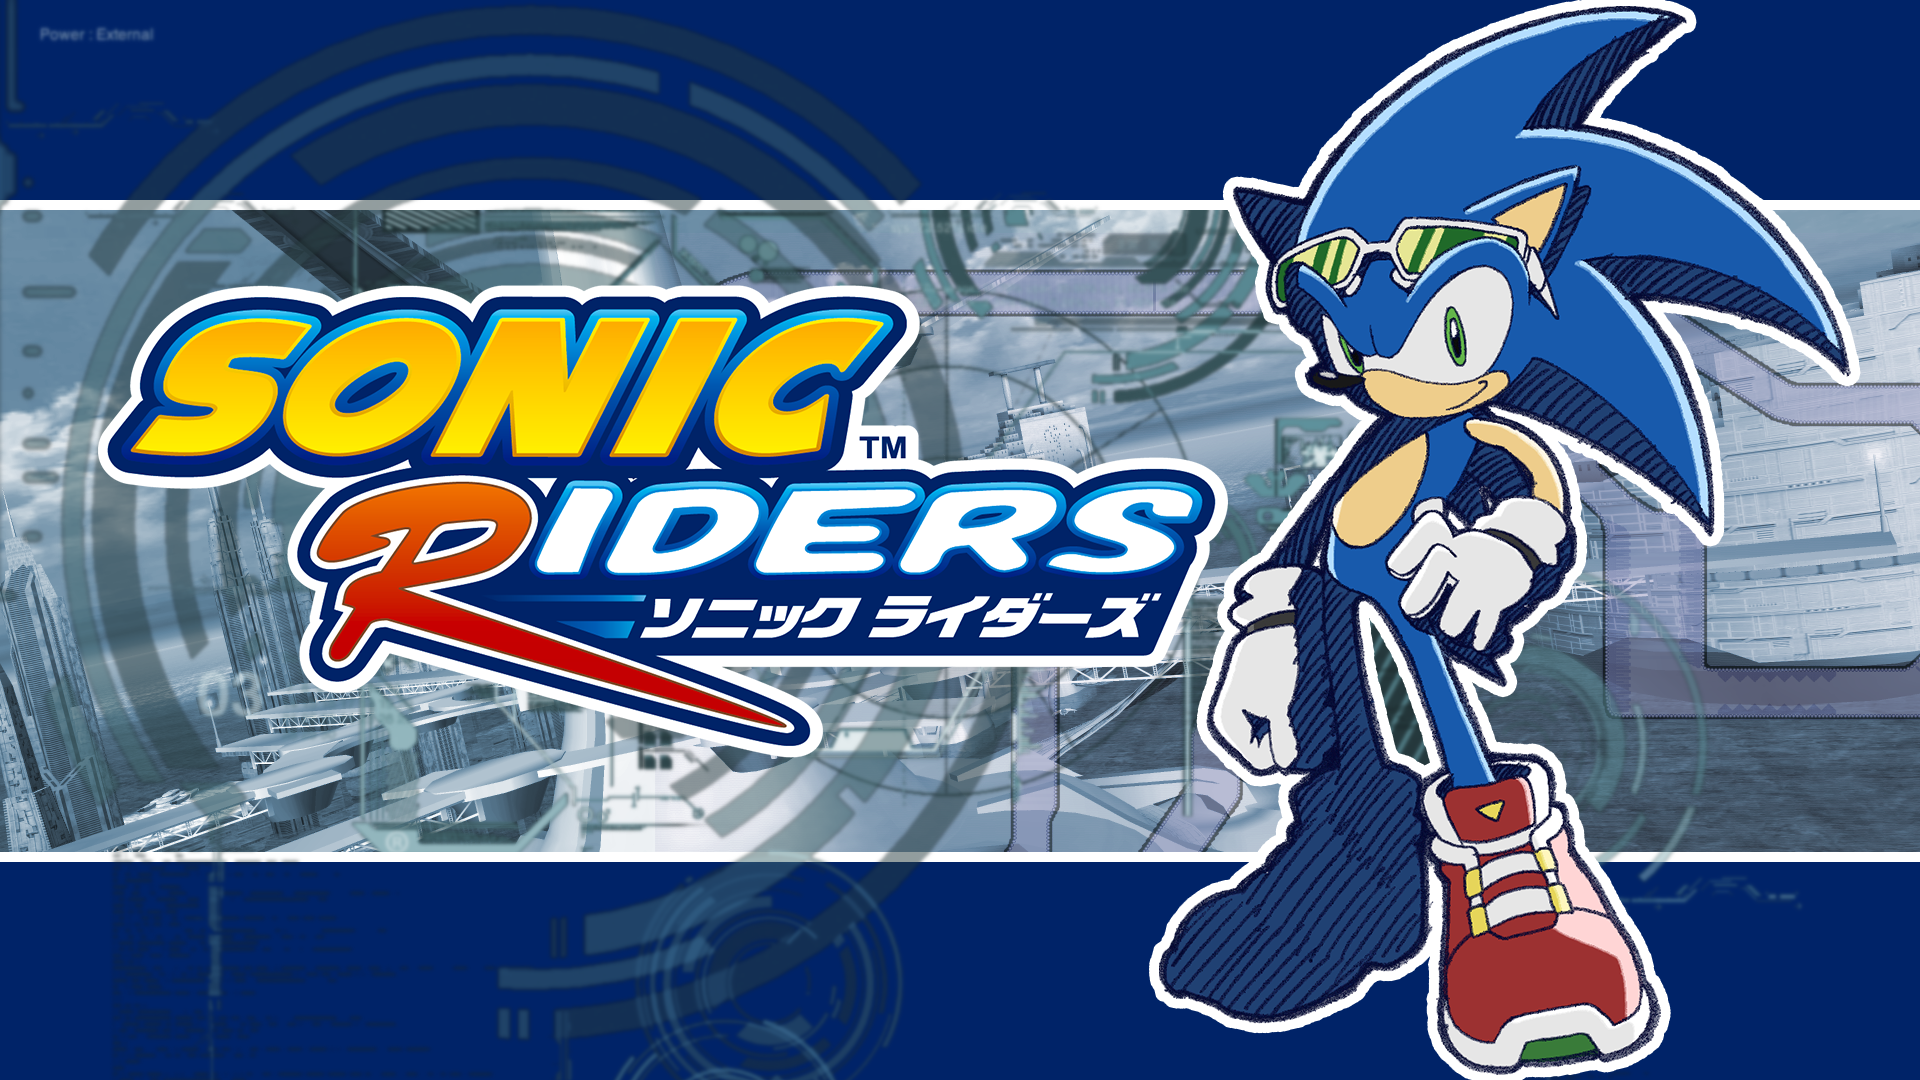 Sonic Riders Wallpaper by Sonicthehedgefox345 on DeviantArt